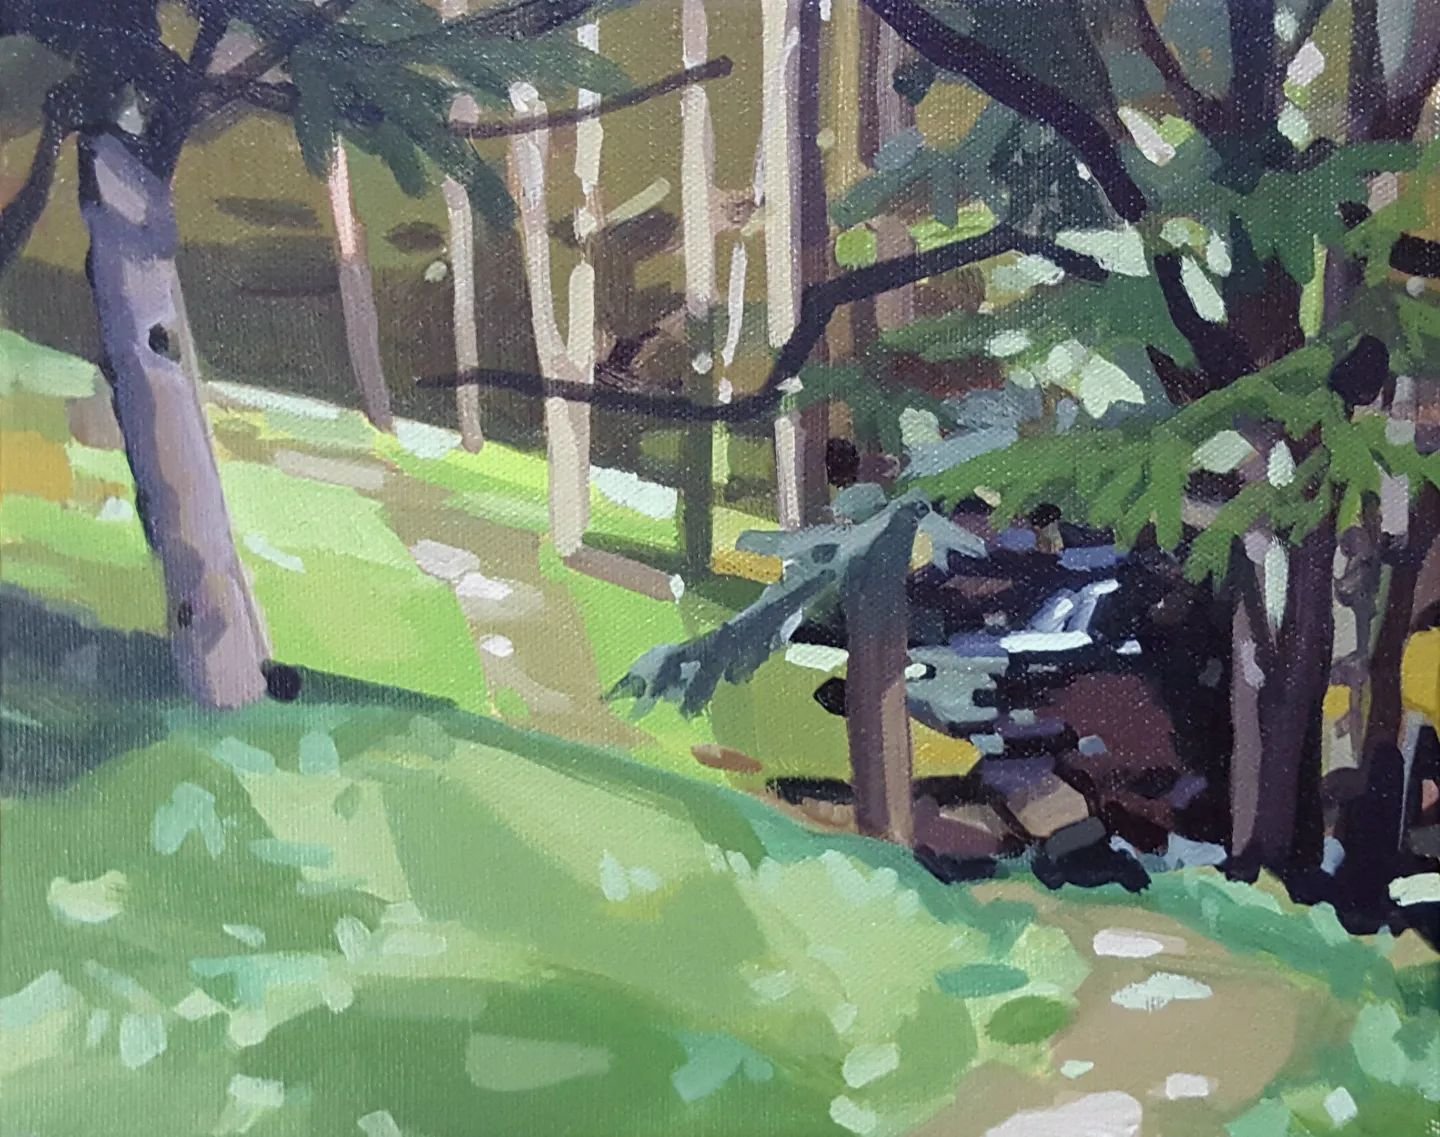 A plein air sketch I did a few years ago in my yard. This view is a few steps from our patio.  I have to remind myself how easy it is just to bring the paint setup outdoors. I really don't have to go too far. 
The bugs in the other hand...

Such a go